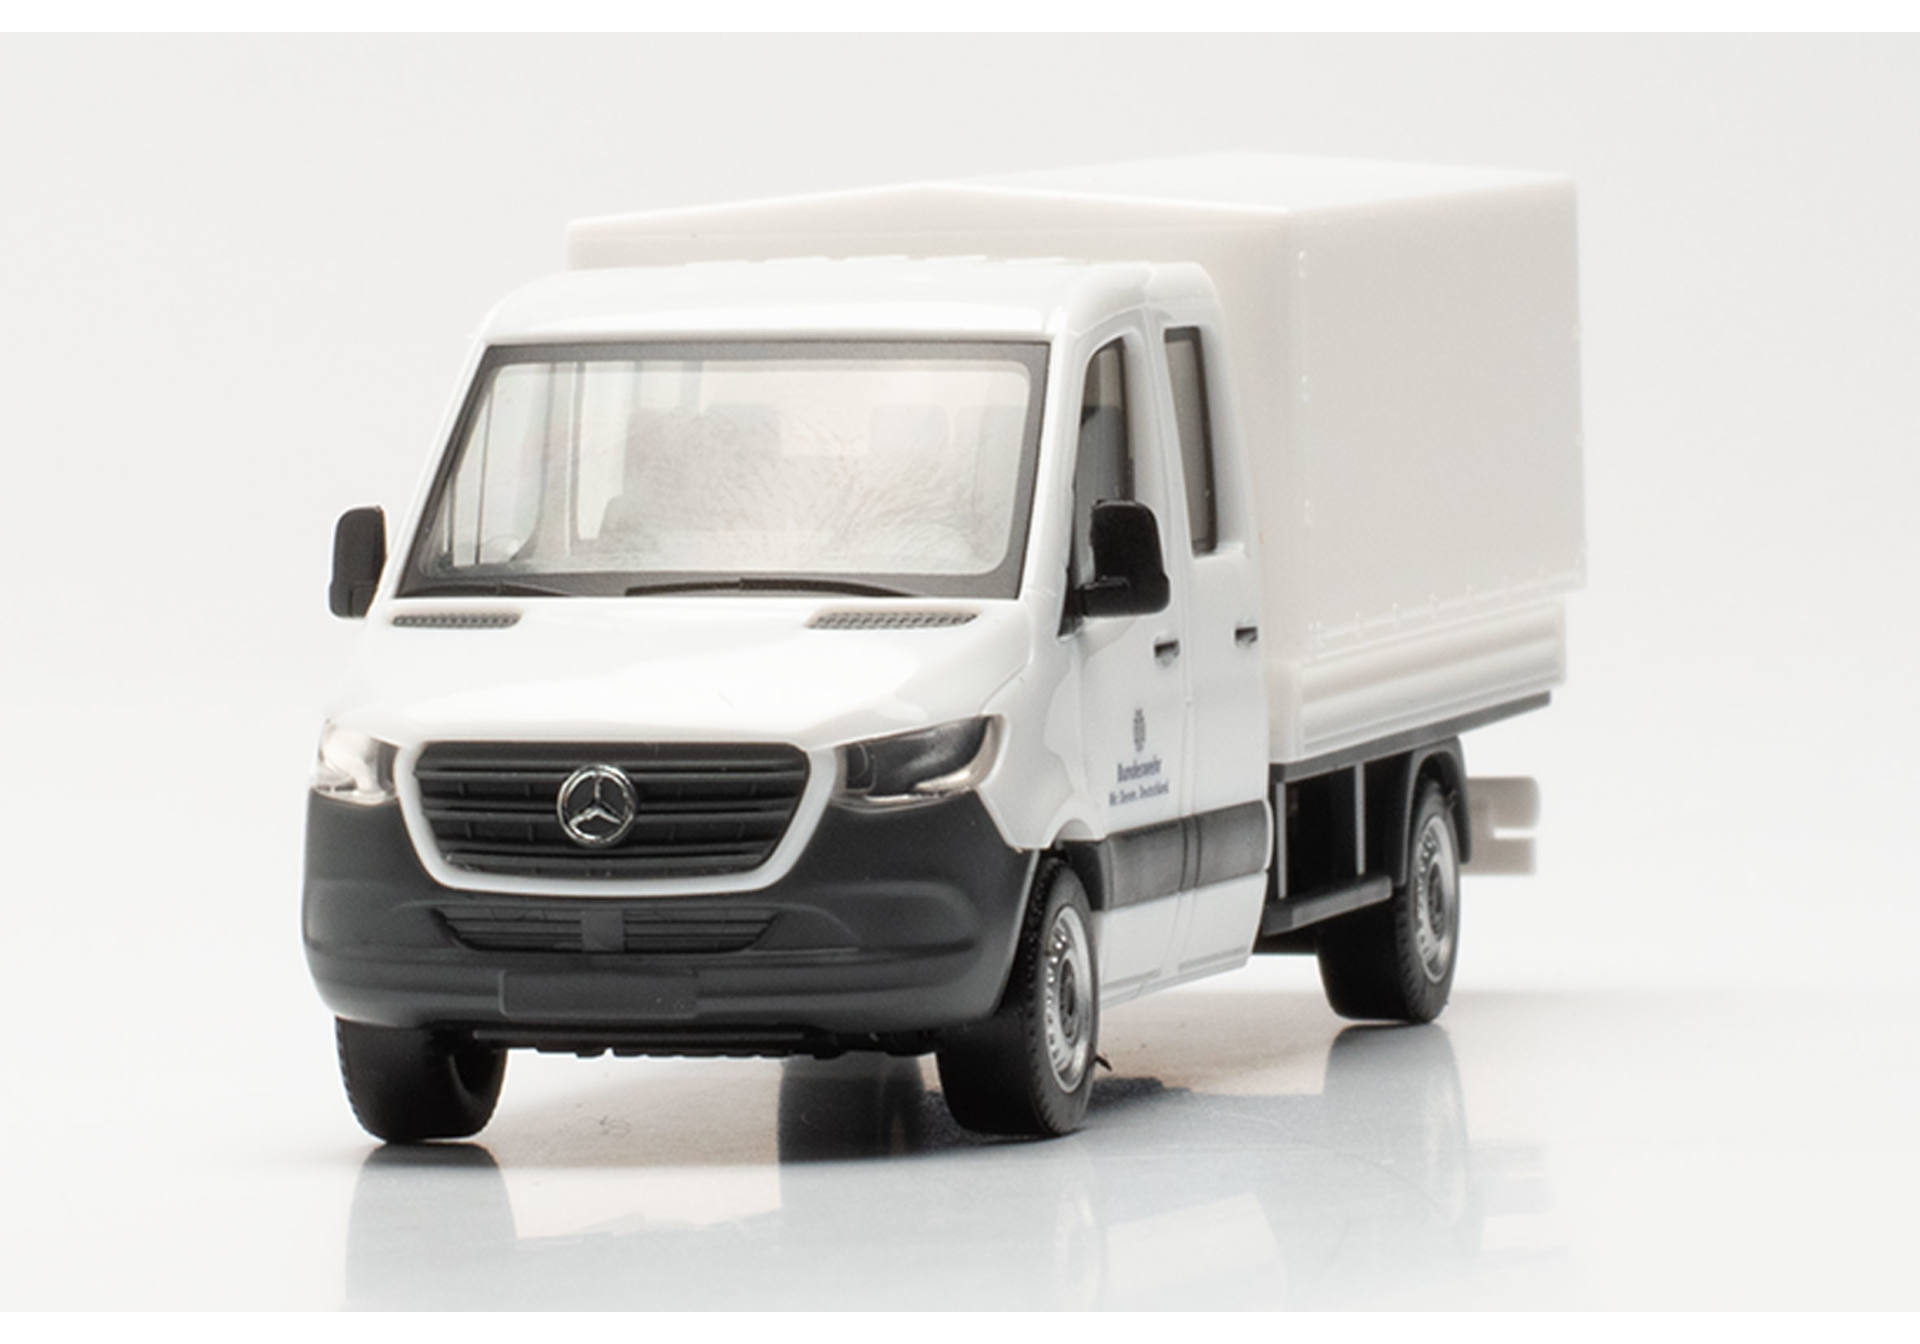 Mercedes-Benz Sprinter `18 with double cab and canvas body „Bundeswehr Fuhrpark Service“